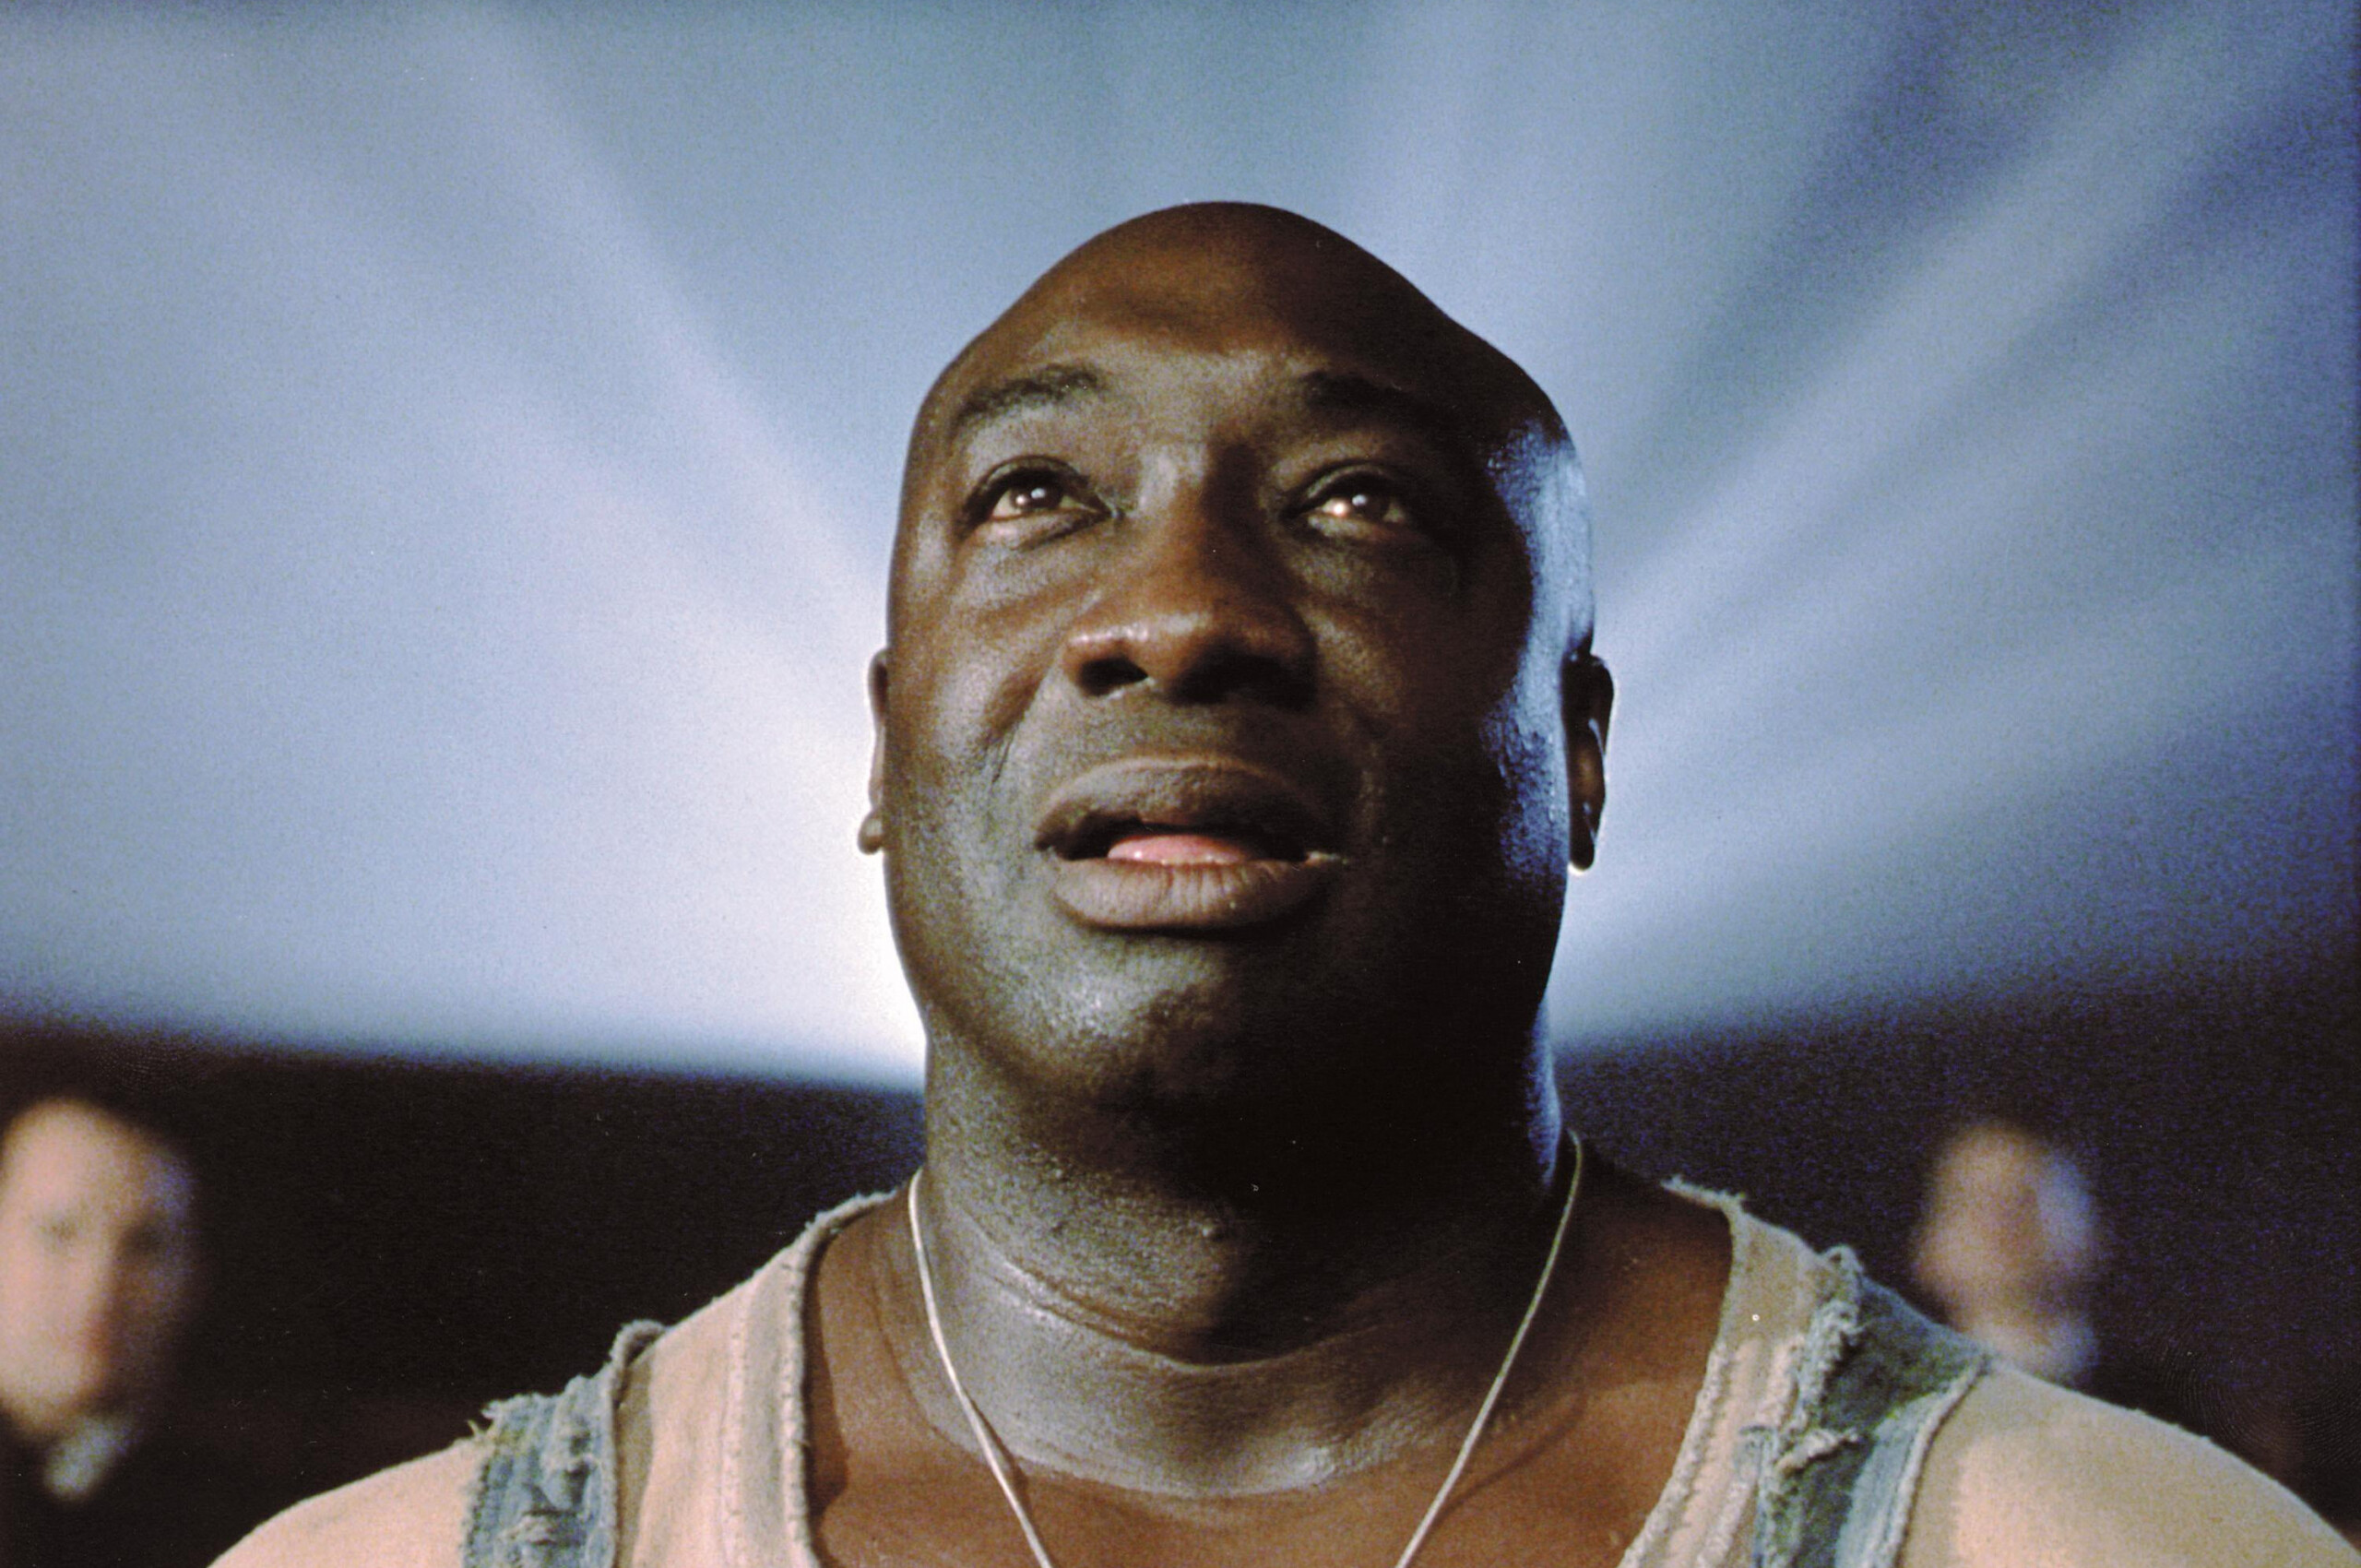 The Green Mile: Michael Clarke Duncan, The film premiered on December 10, 1999. 2560x1700 HD Wallpaper.